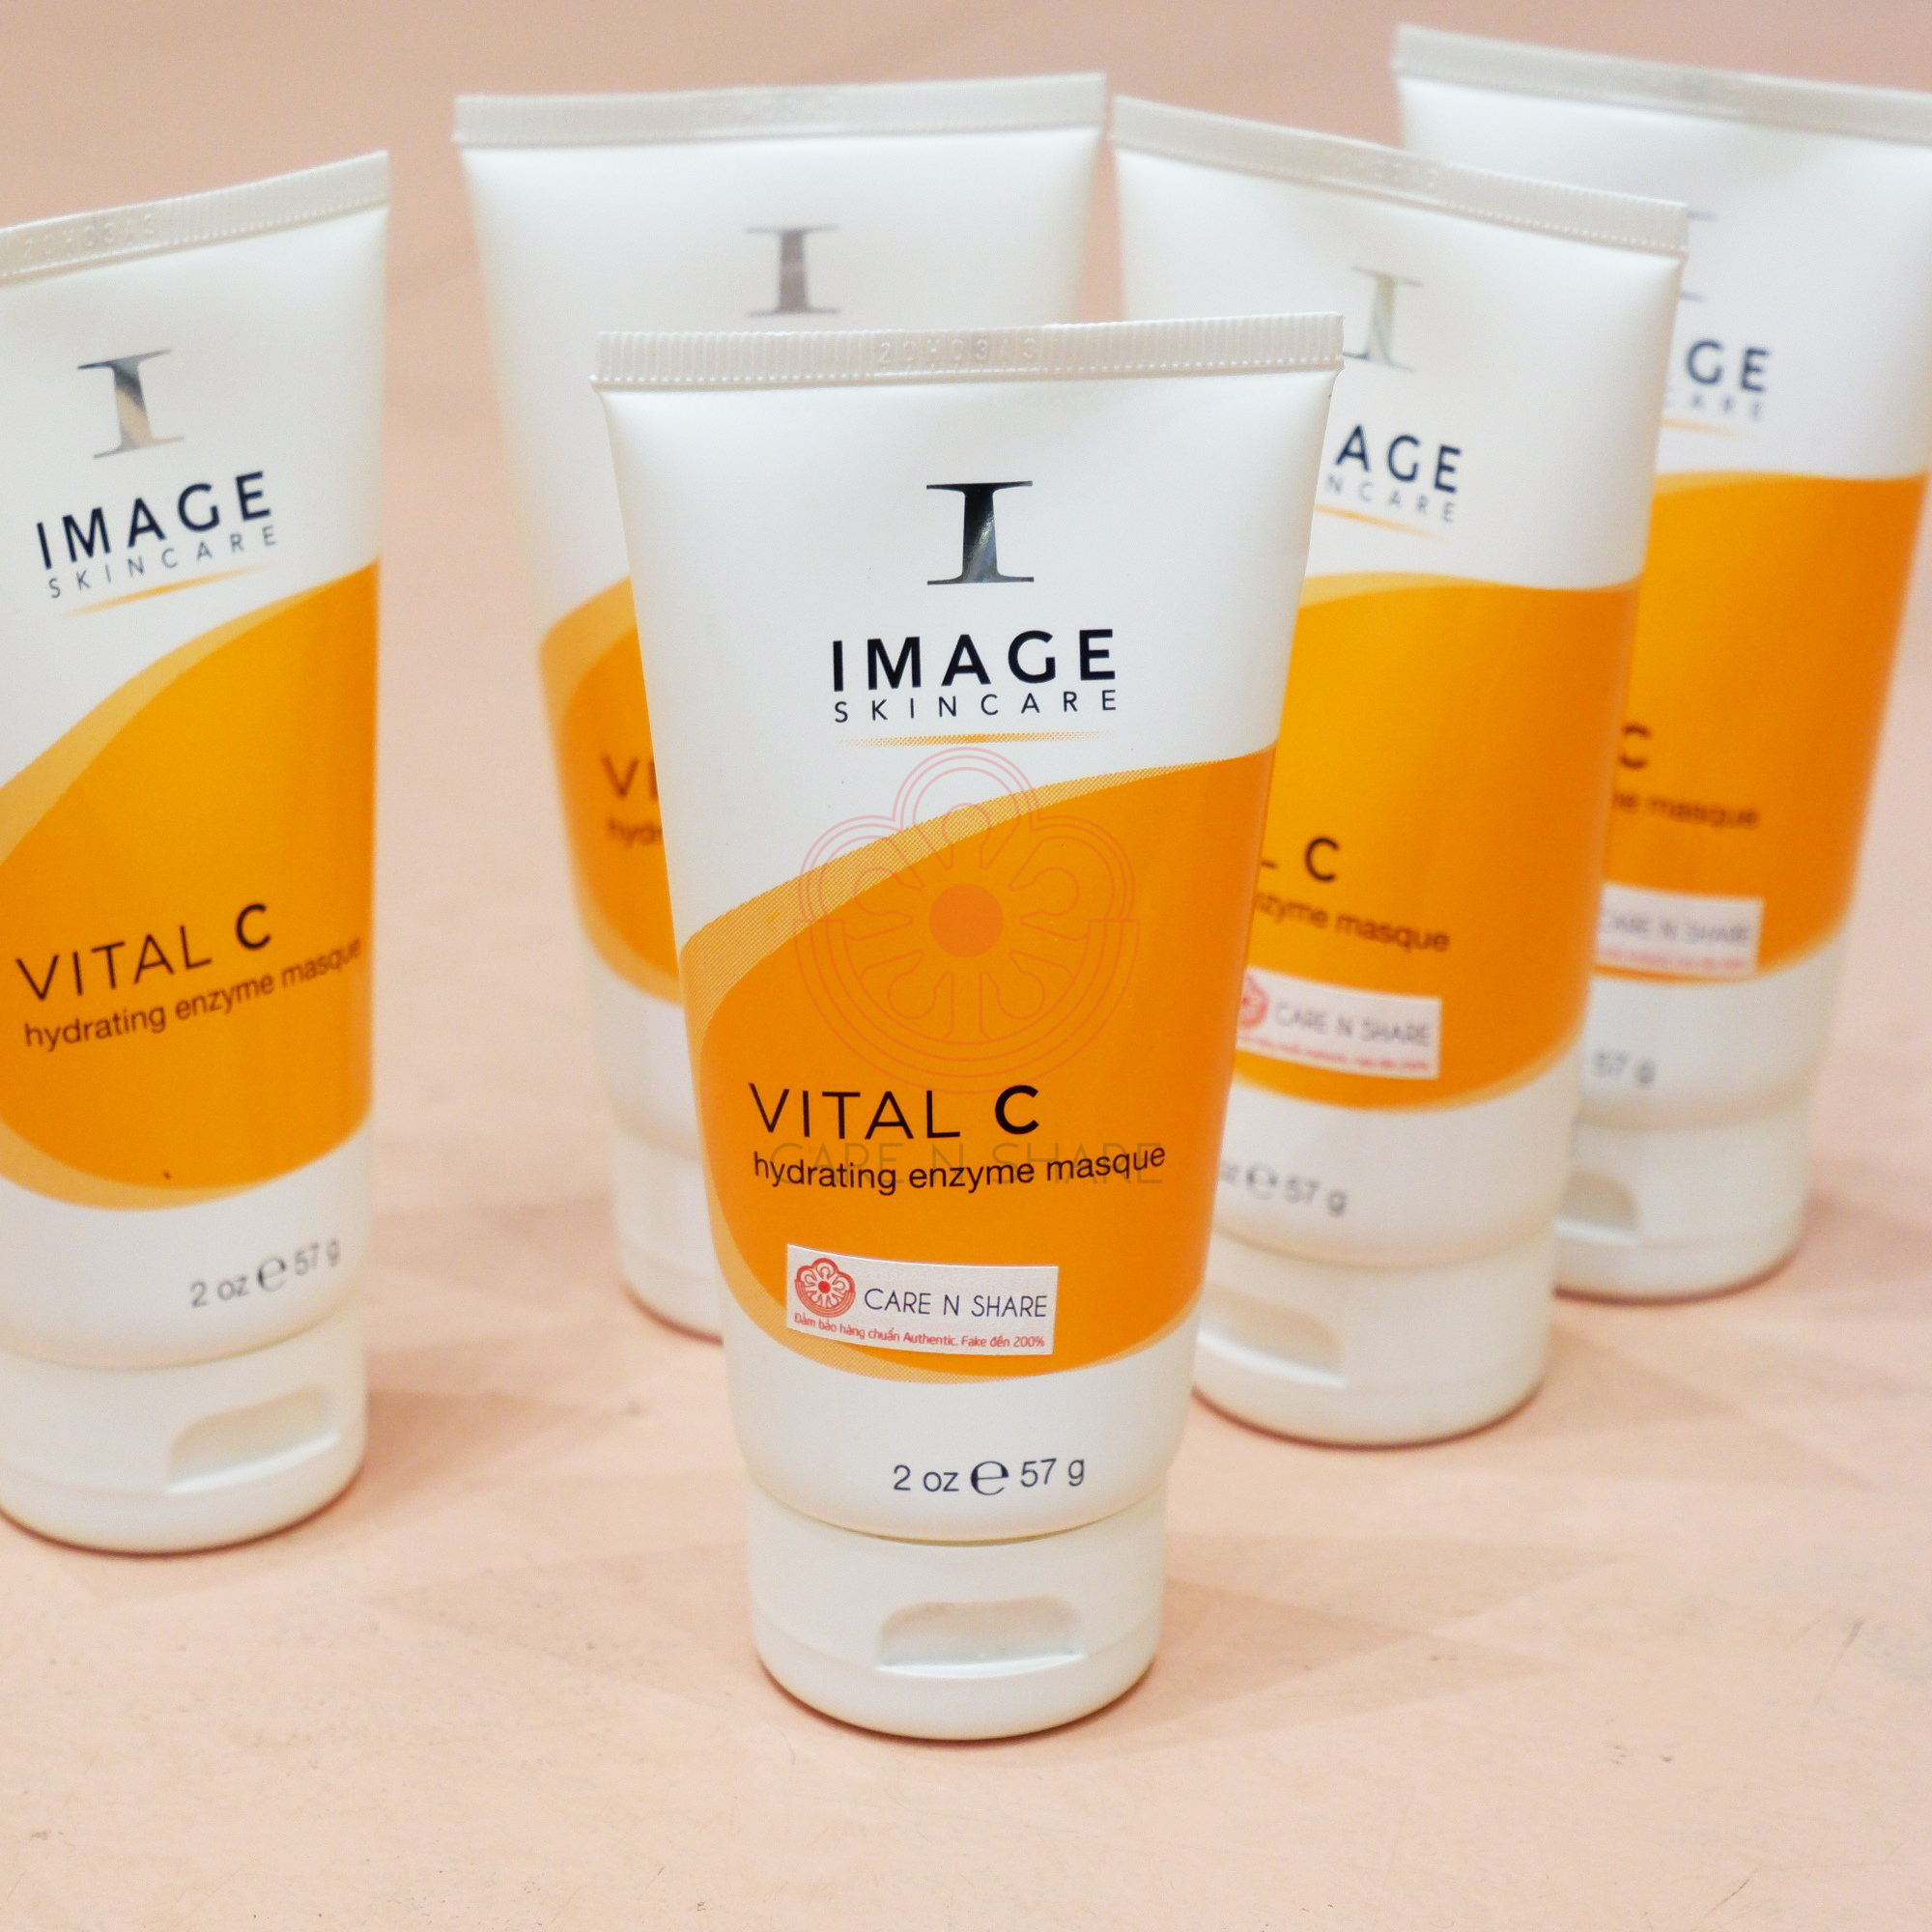 IMAGE VITAL C HYDRATING ENZYME MASQUE